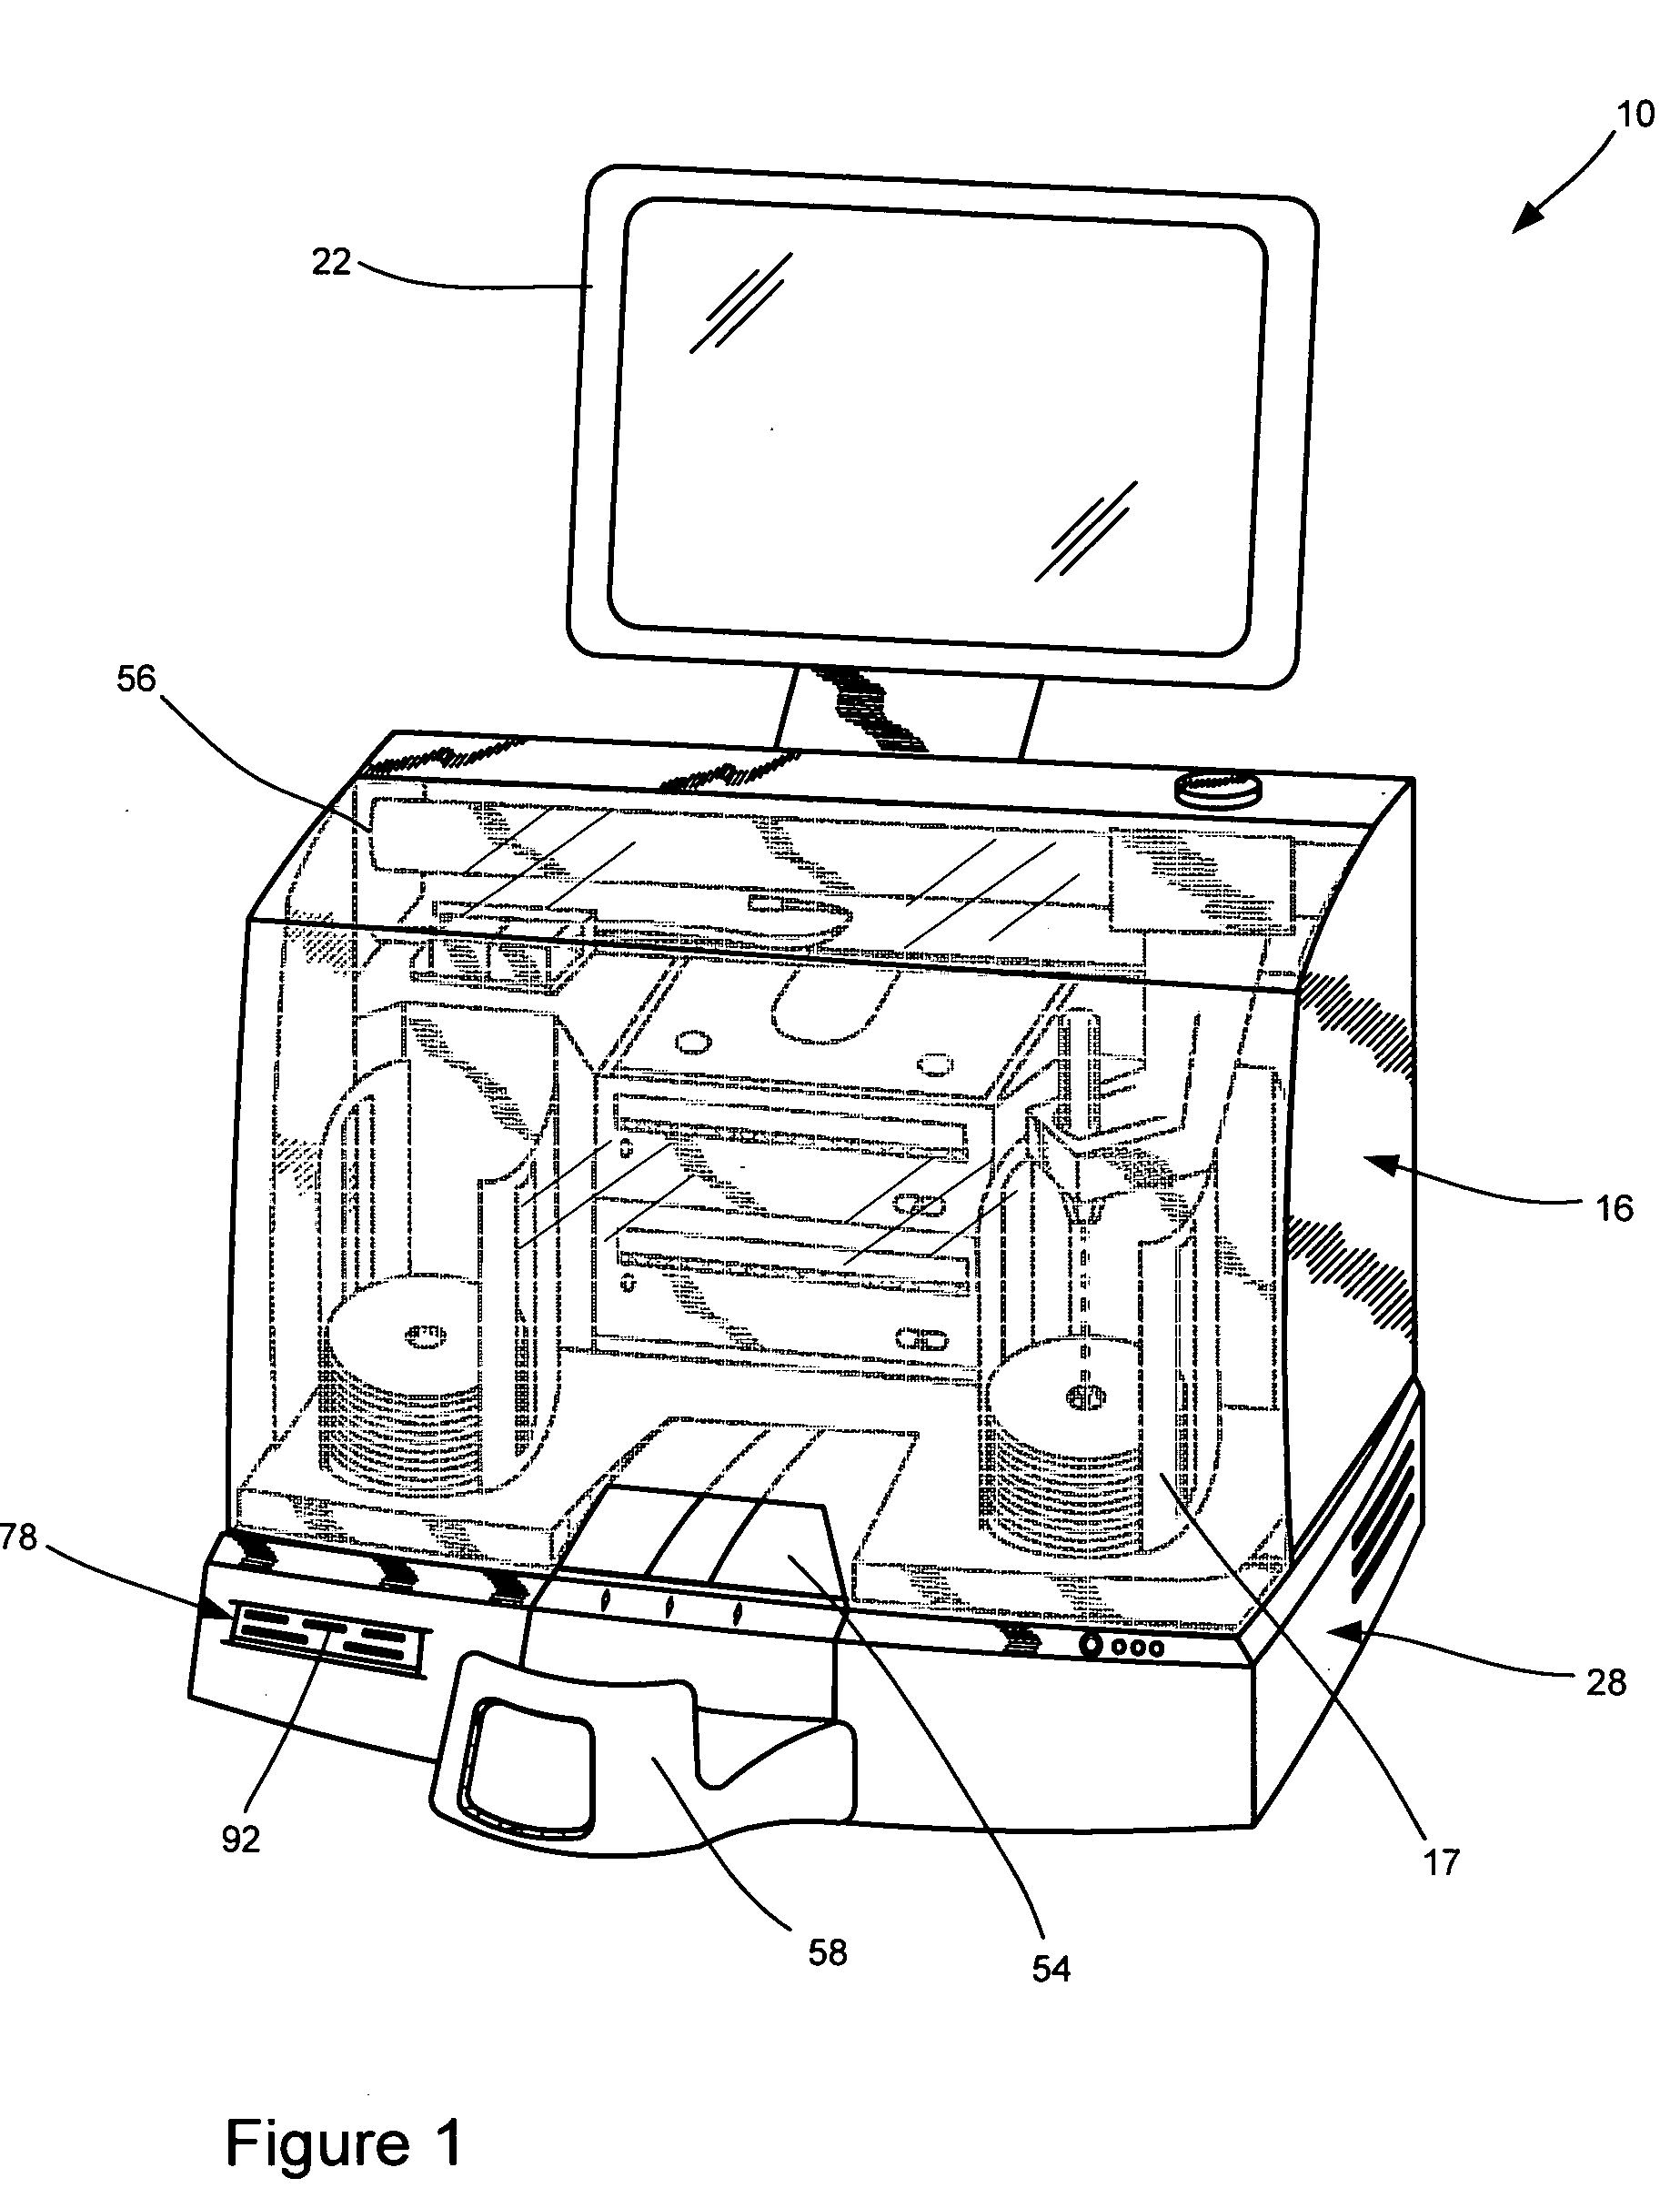 Apparatus and method for publishing computer-readable media